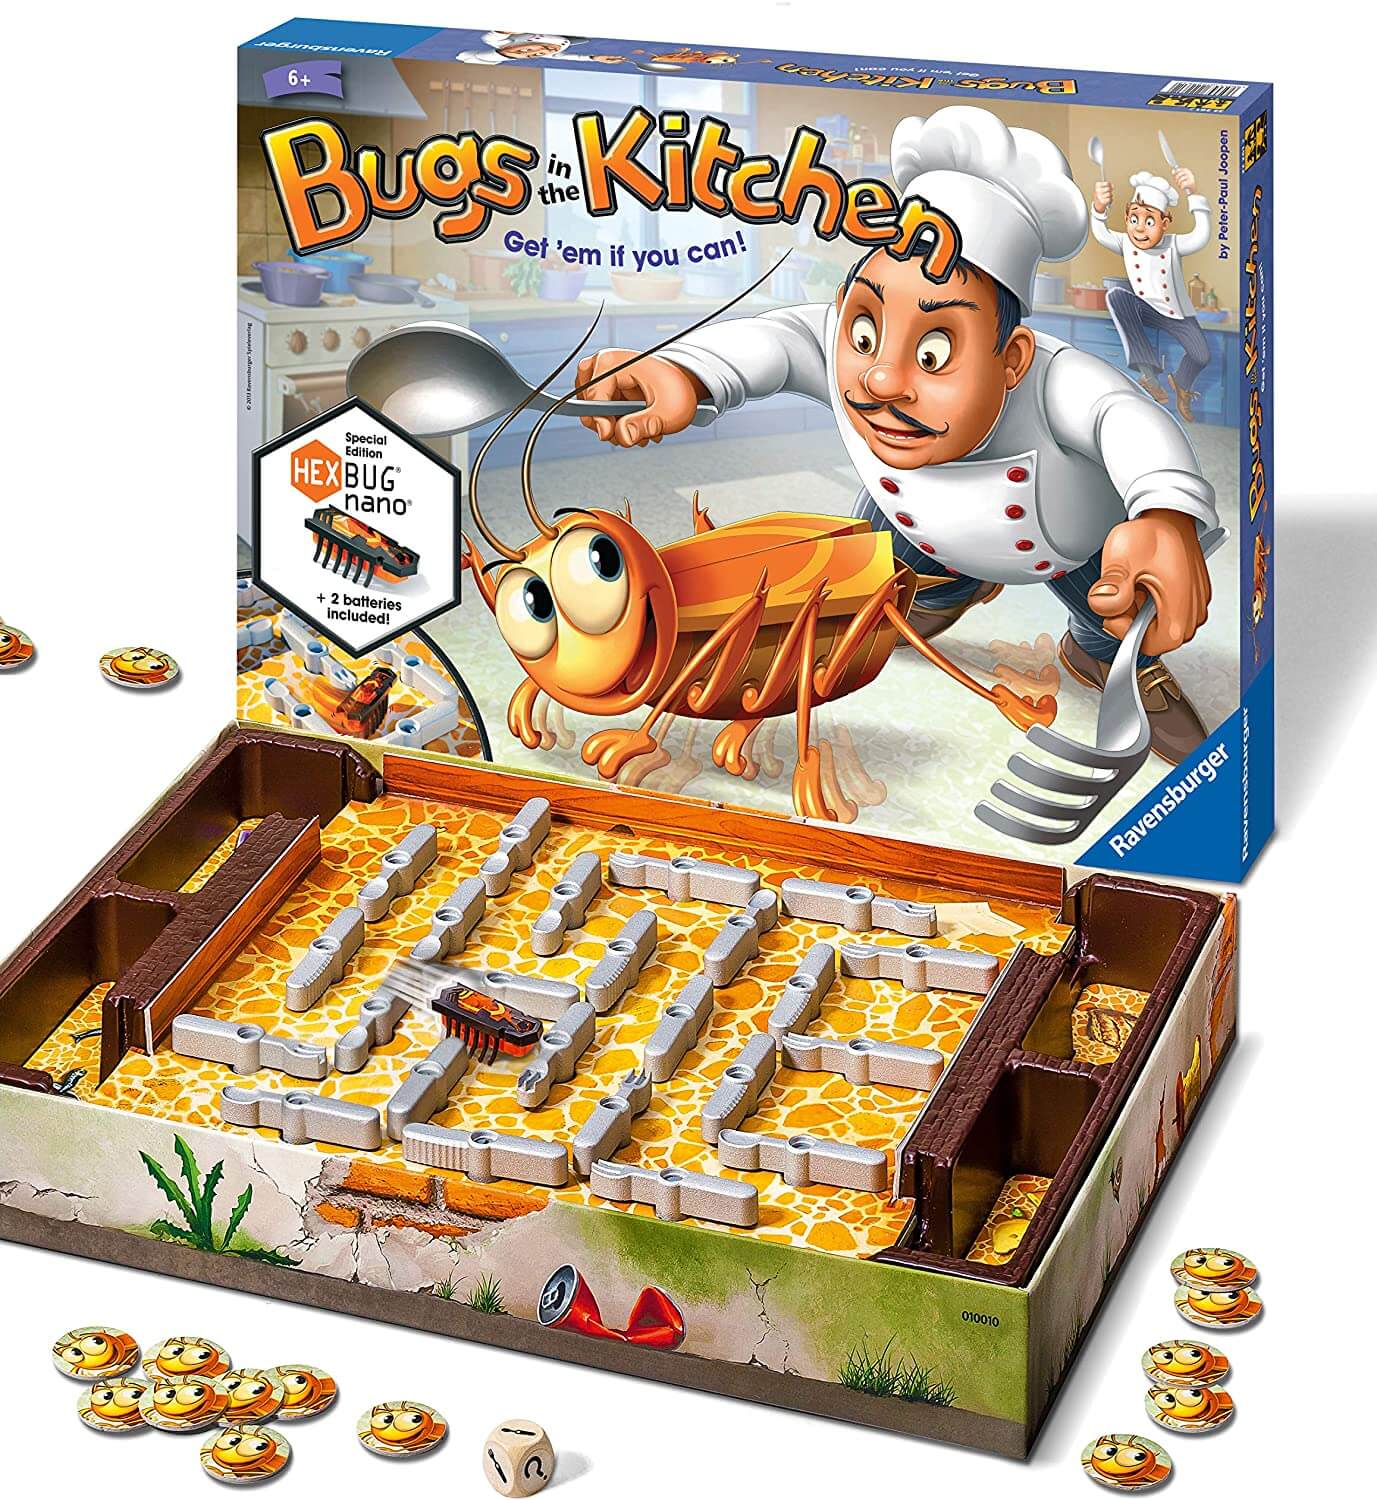 Bugs In The Kitchen - Catch the Hexbug Game